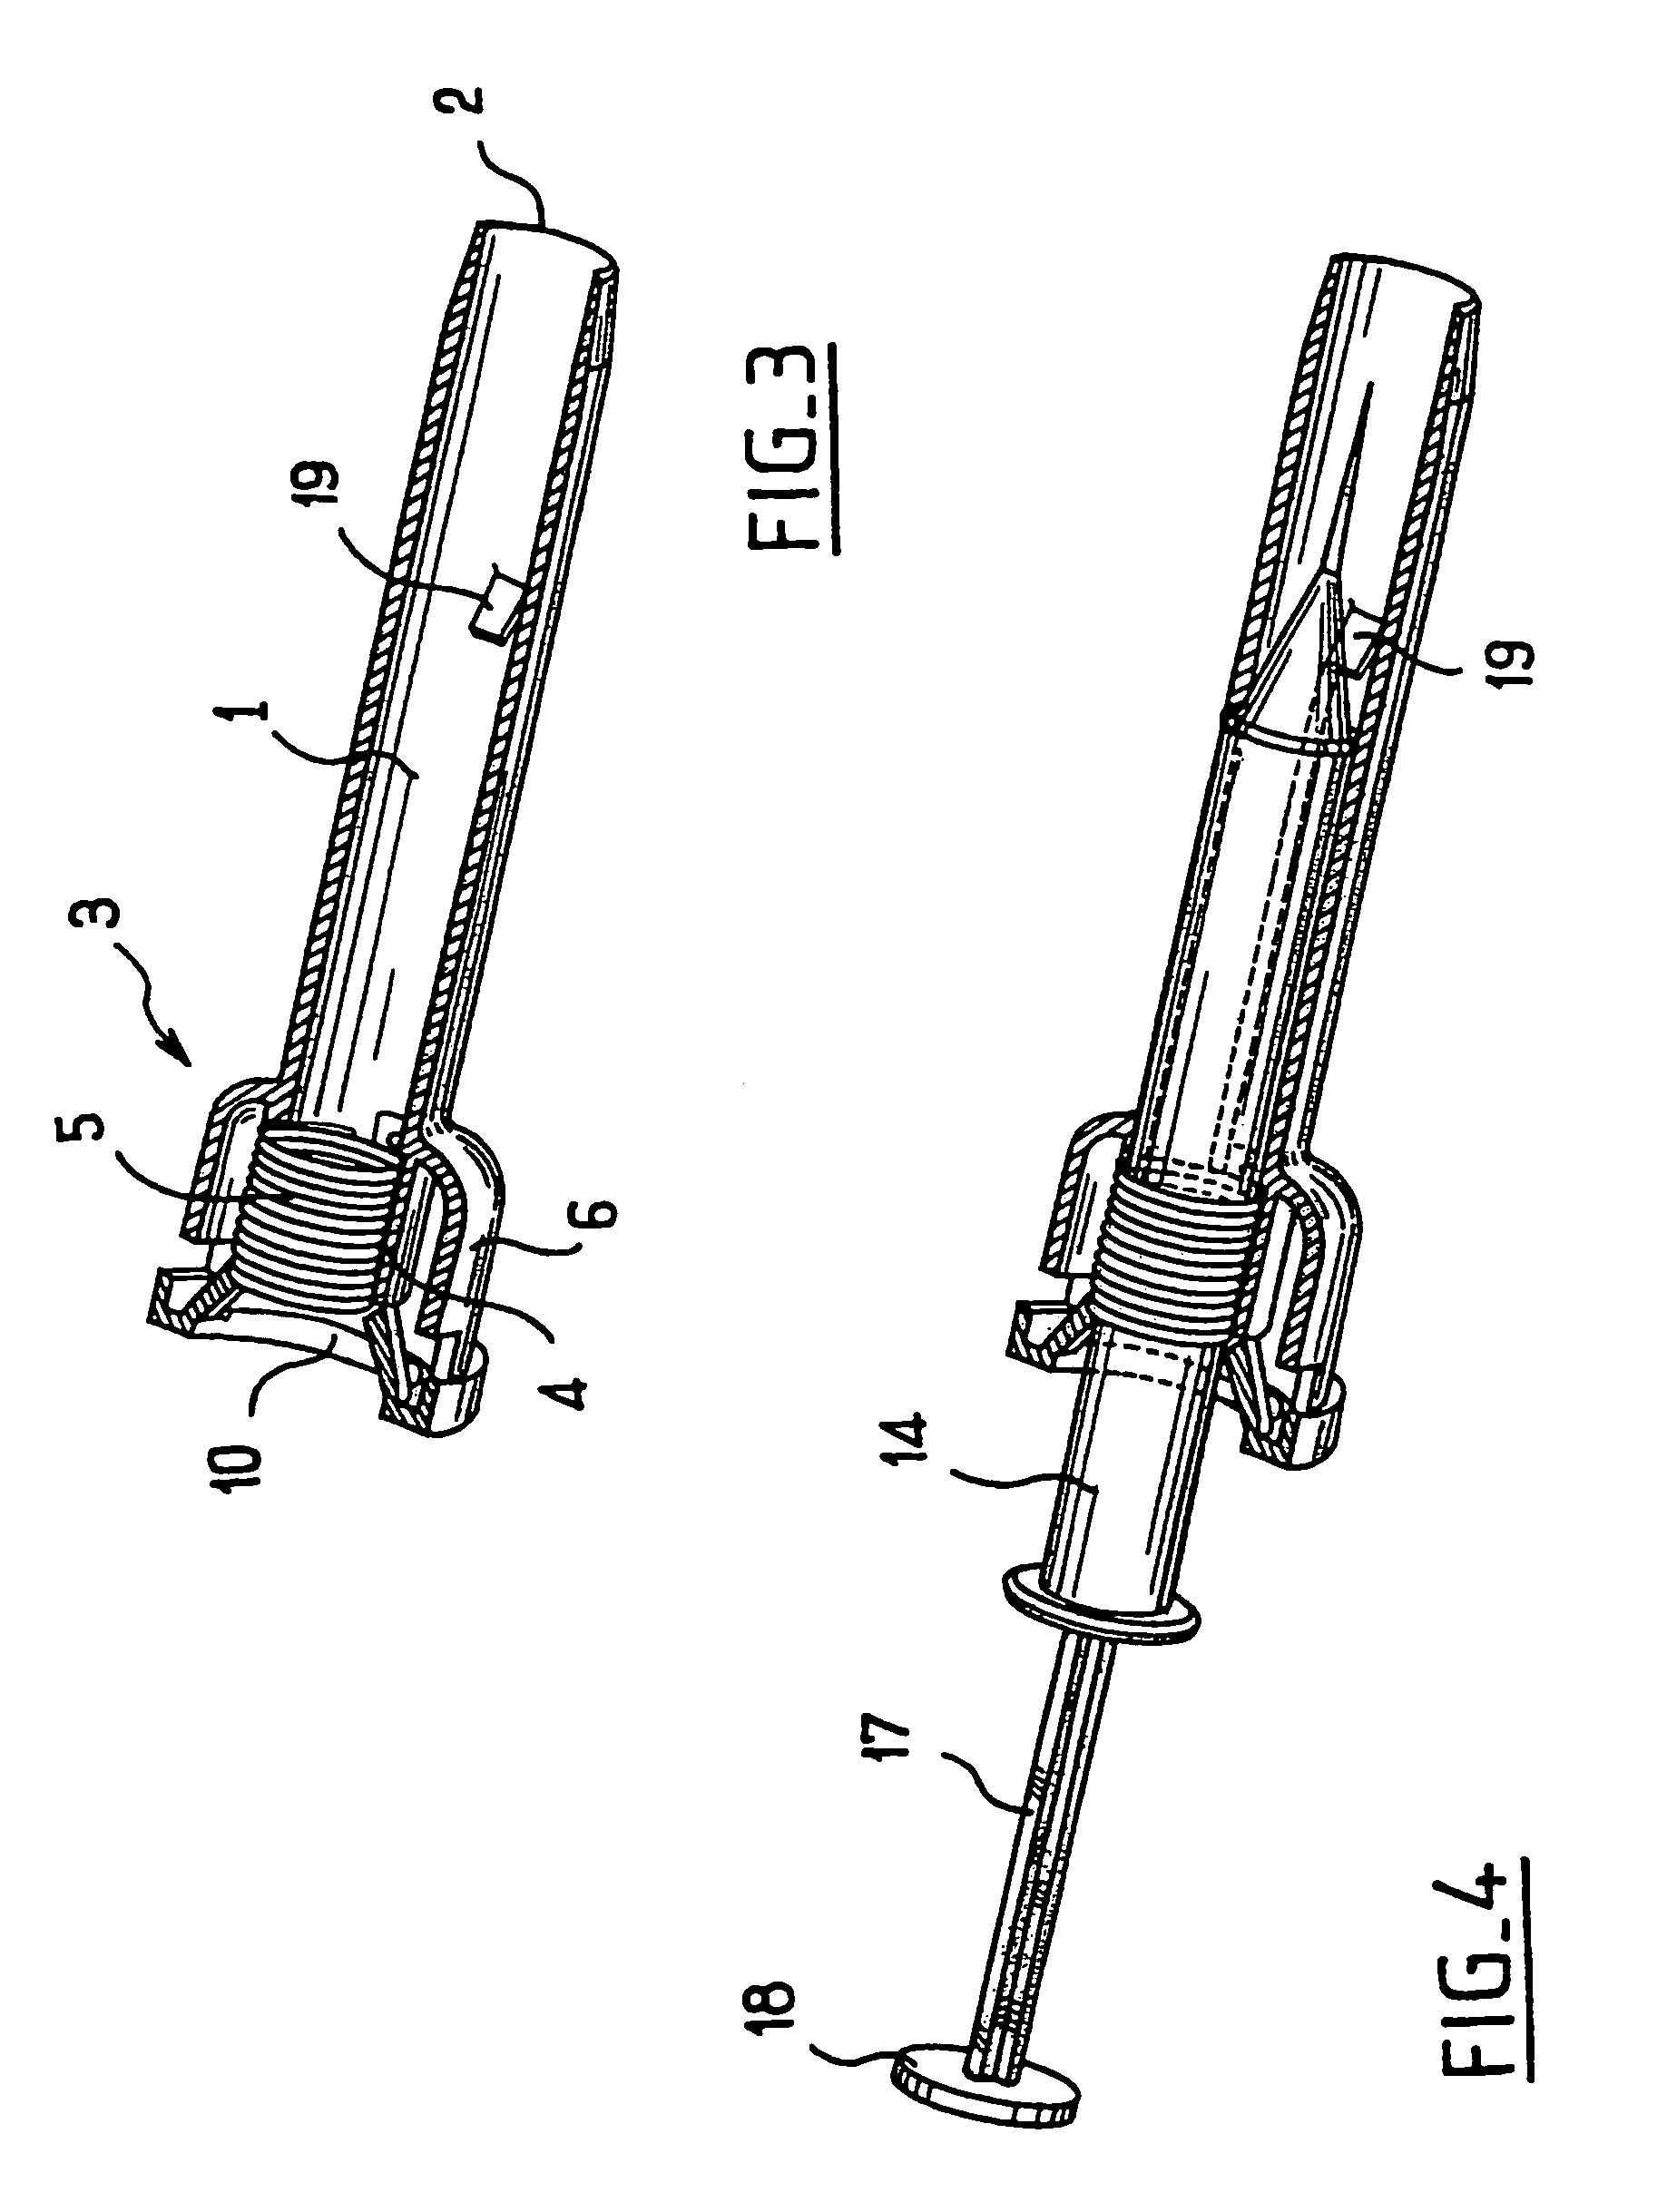 Safety device for an injection syringe